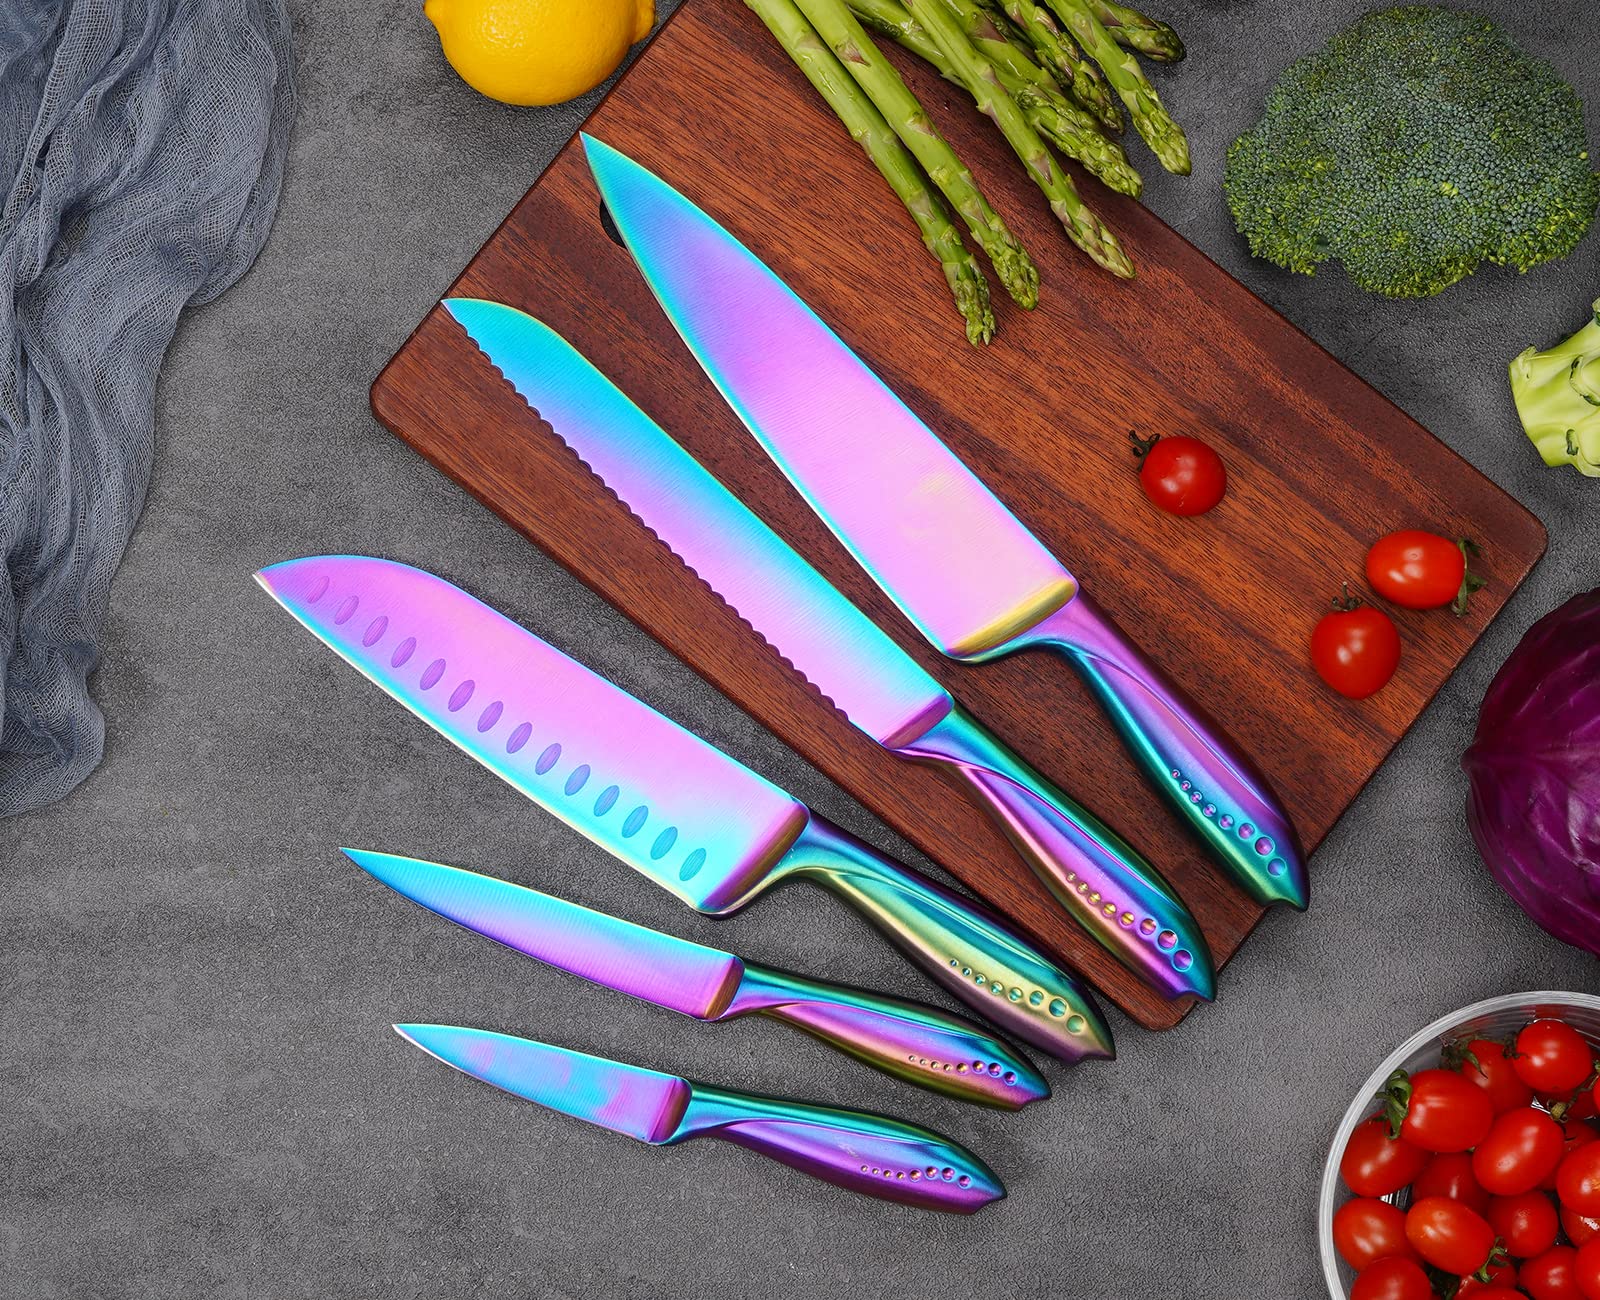 Hollory Rainbow Kitchen Knife Set 5 Piece, Super Sharp German Stainless Steel Blade with 8 in Chef, 8 in Bread, 7 in Santoku, 5 in Utility, 3.5 in Paring - Gift Box